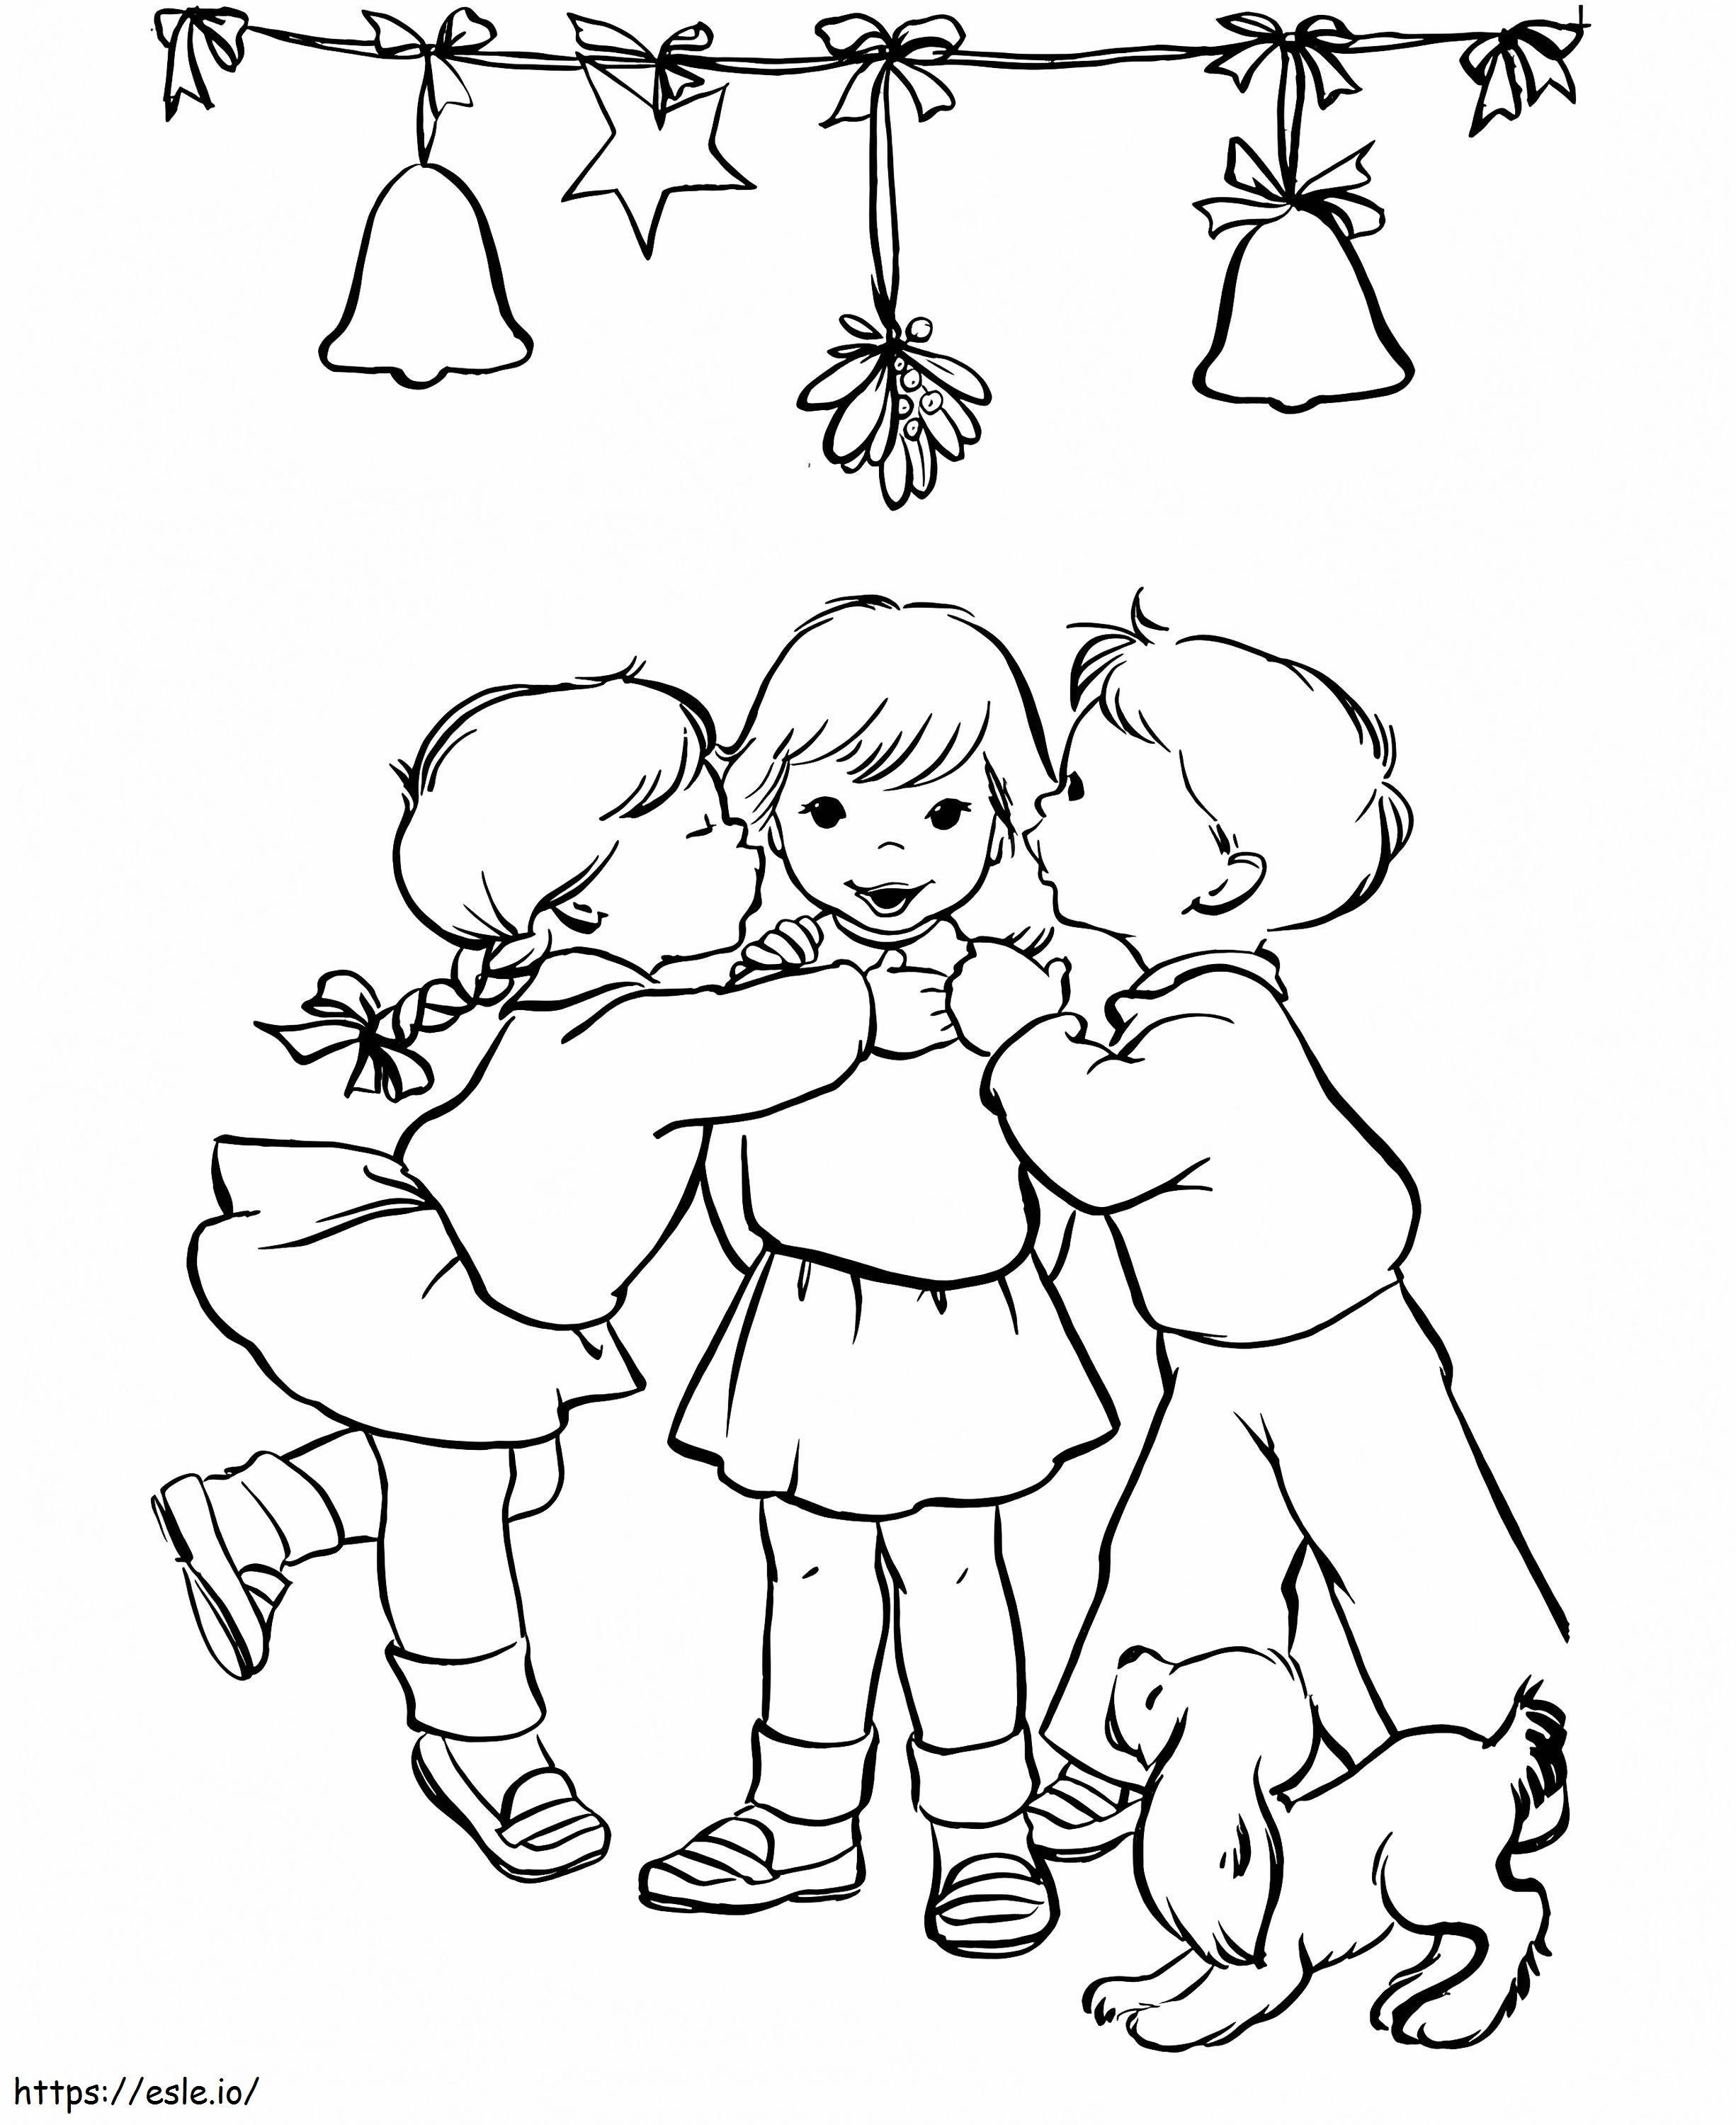 Kids Under The Mistletoe coloring page